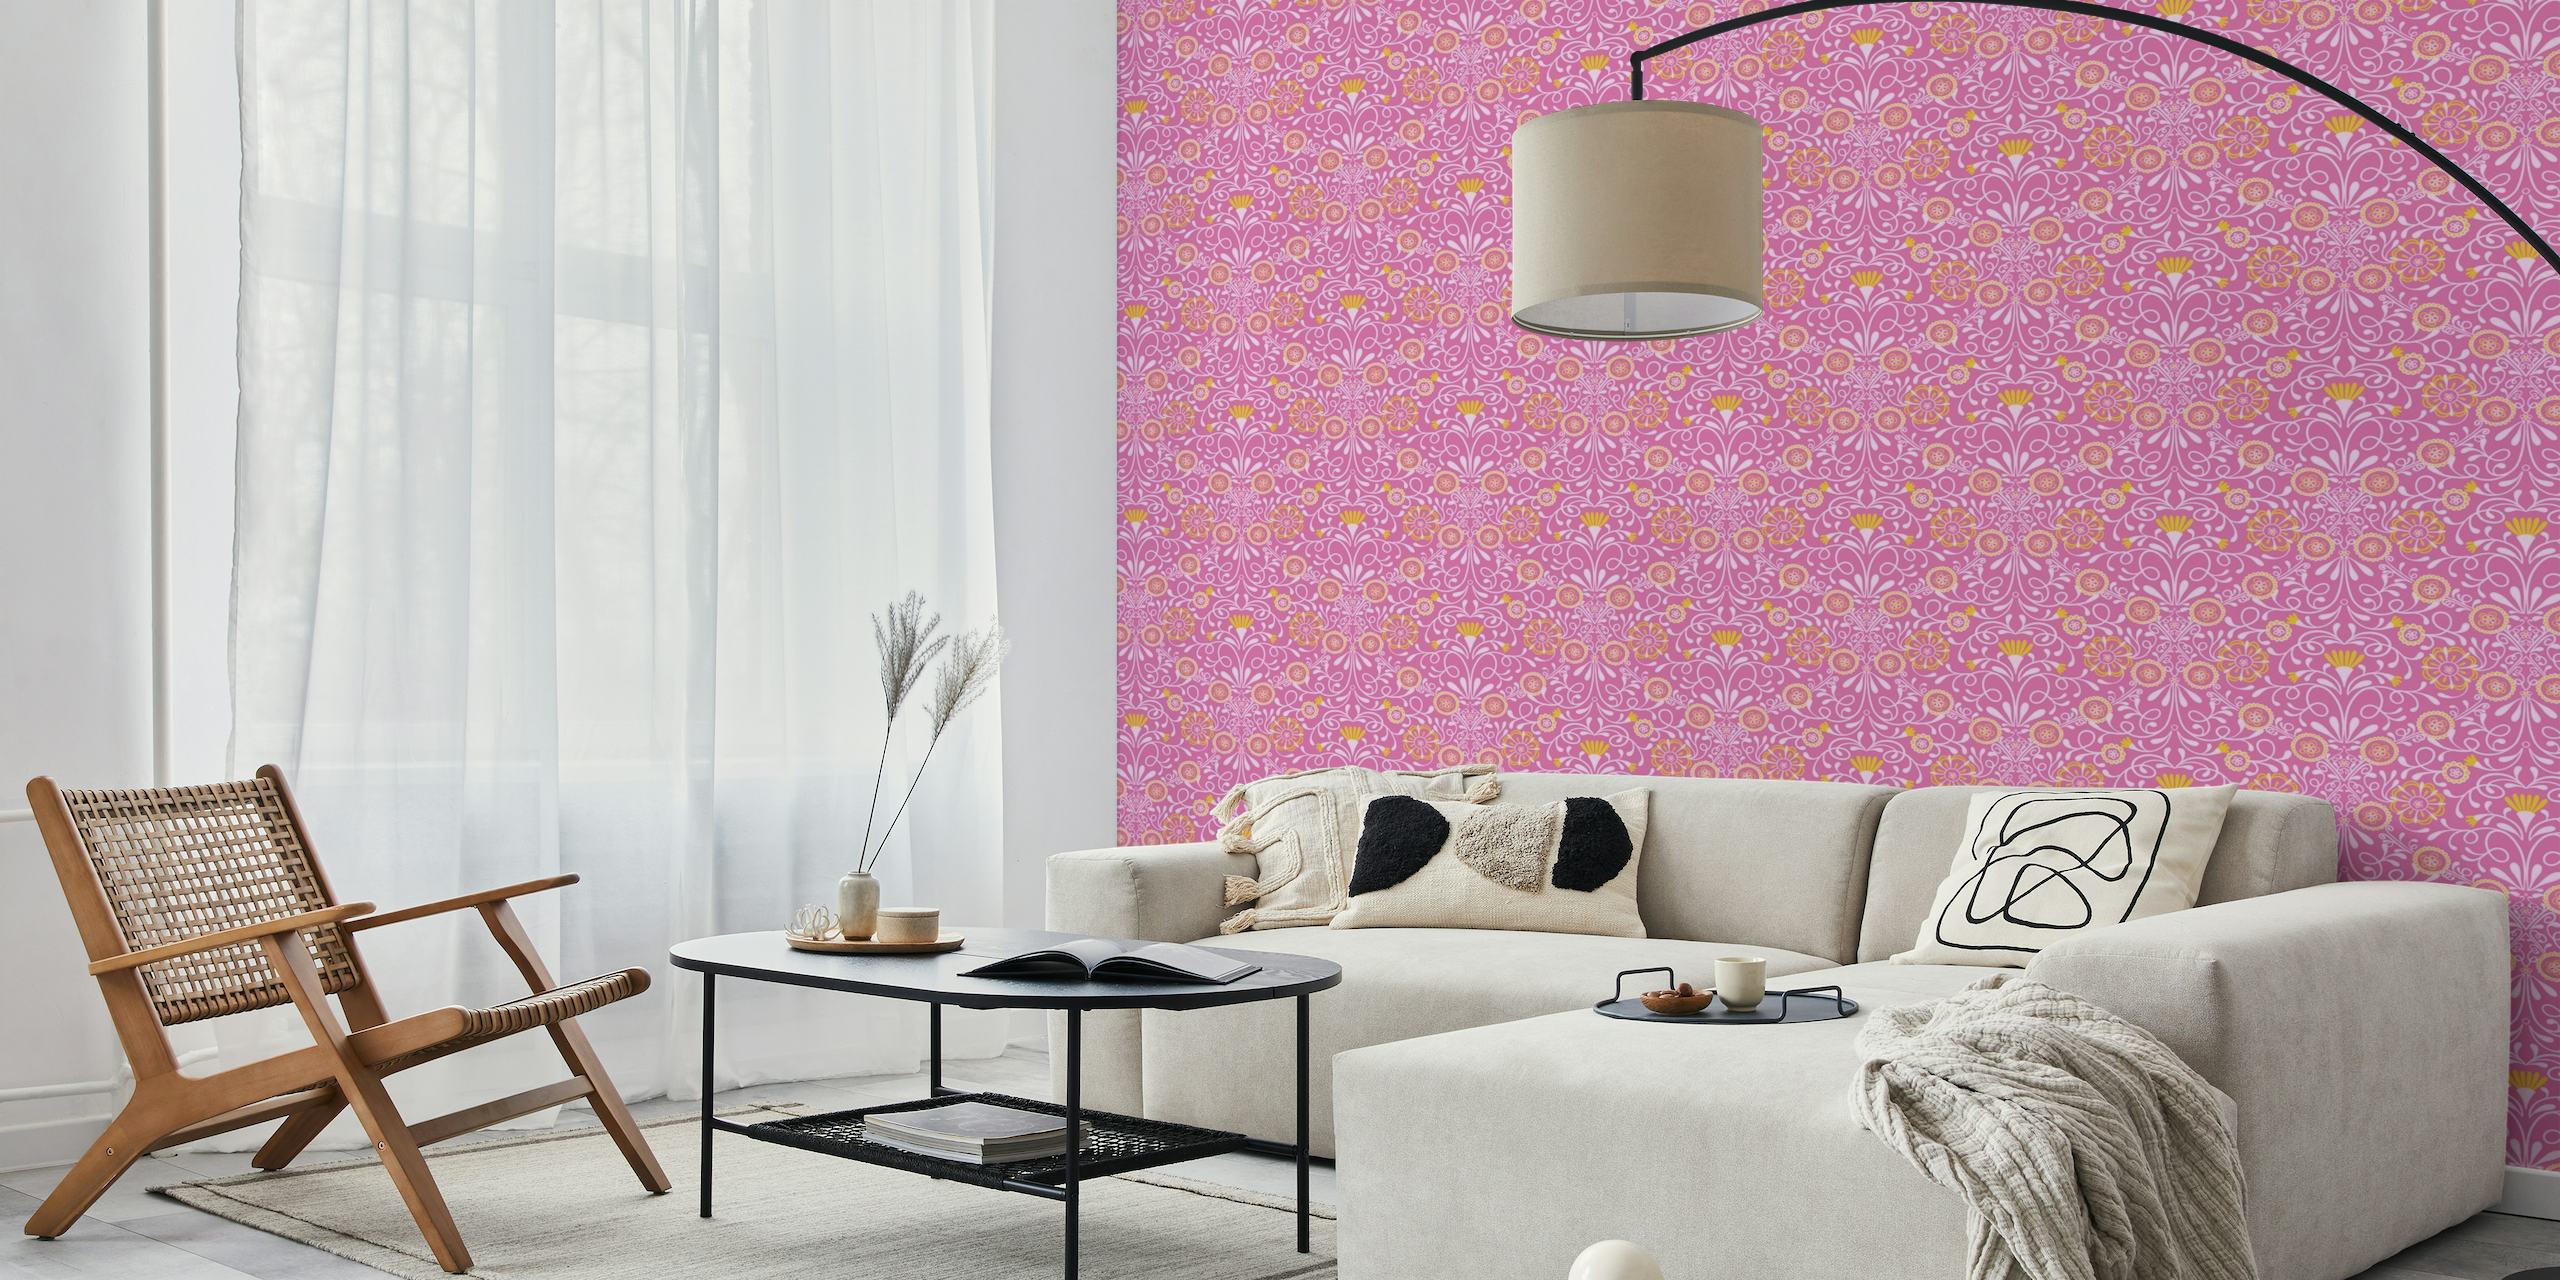 Tuscan Tile in Pink and Yellow tapete